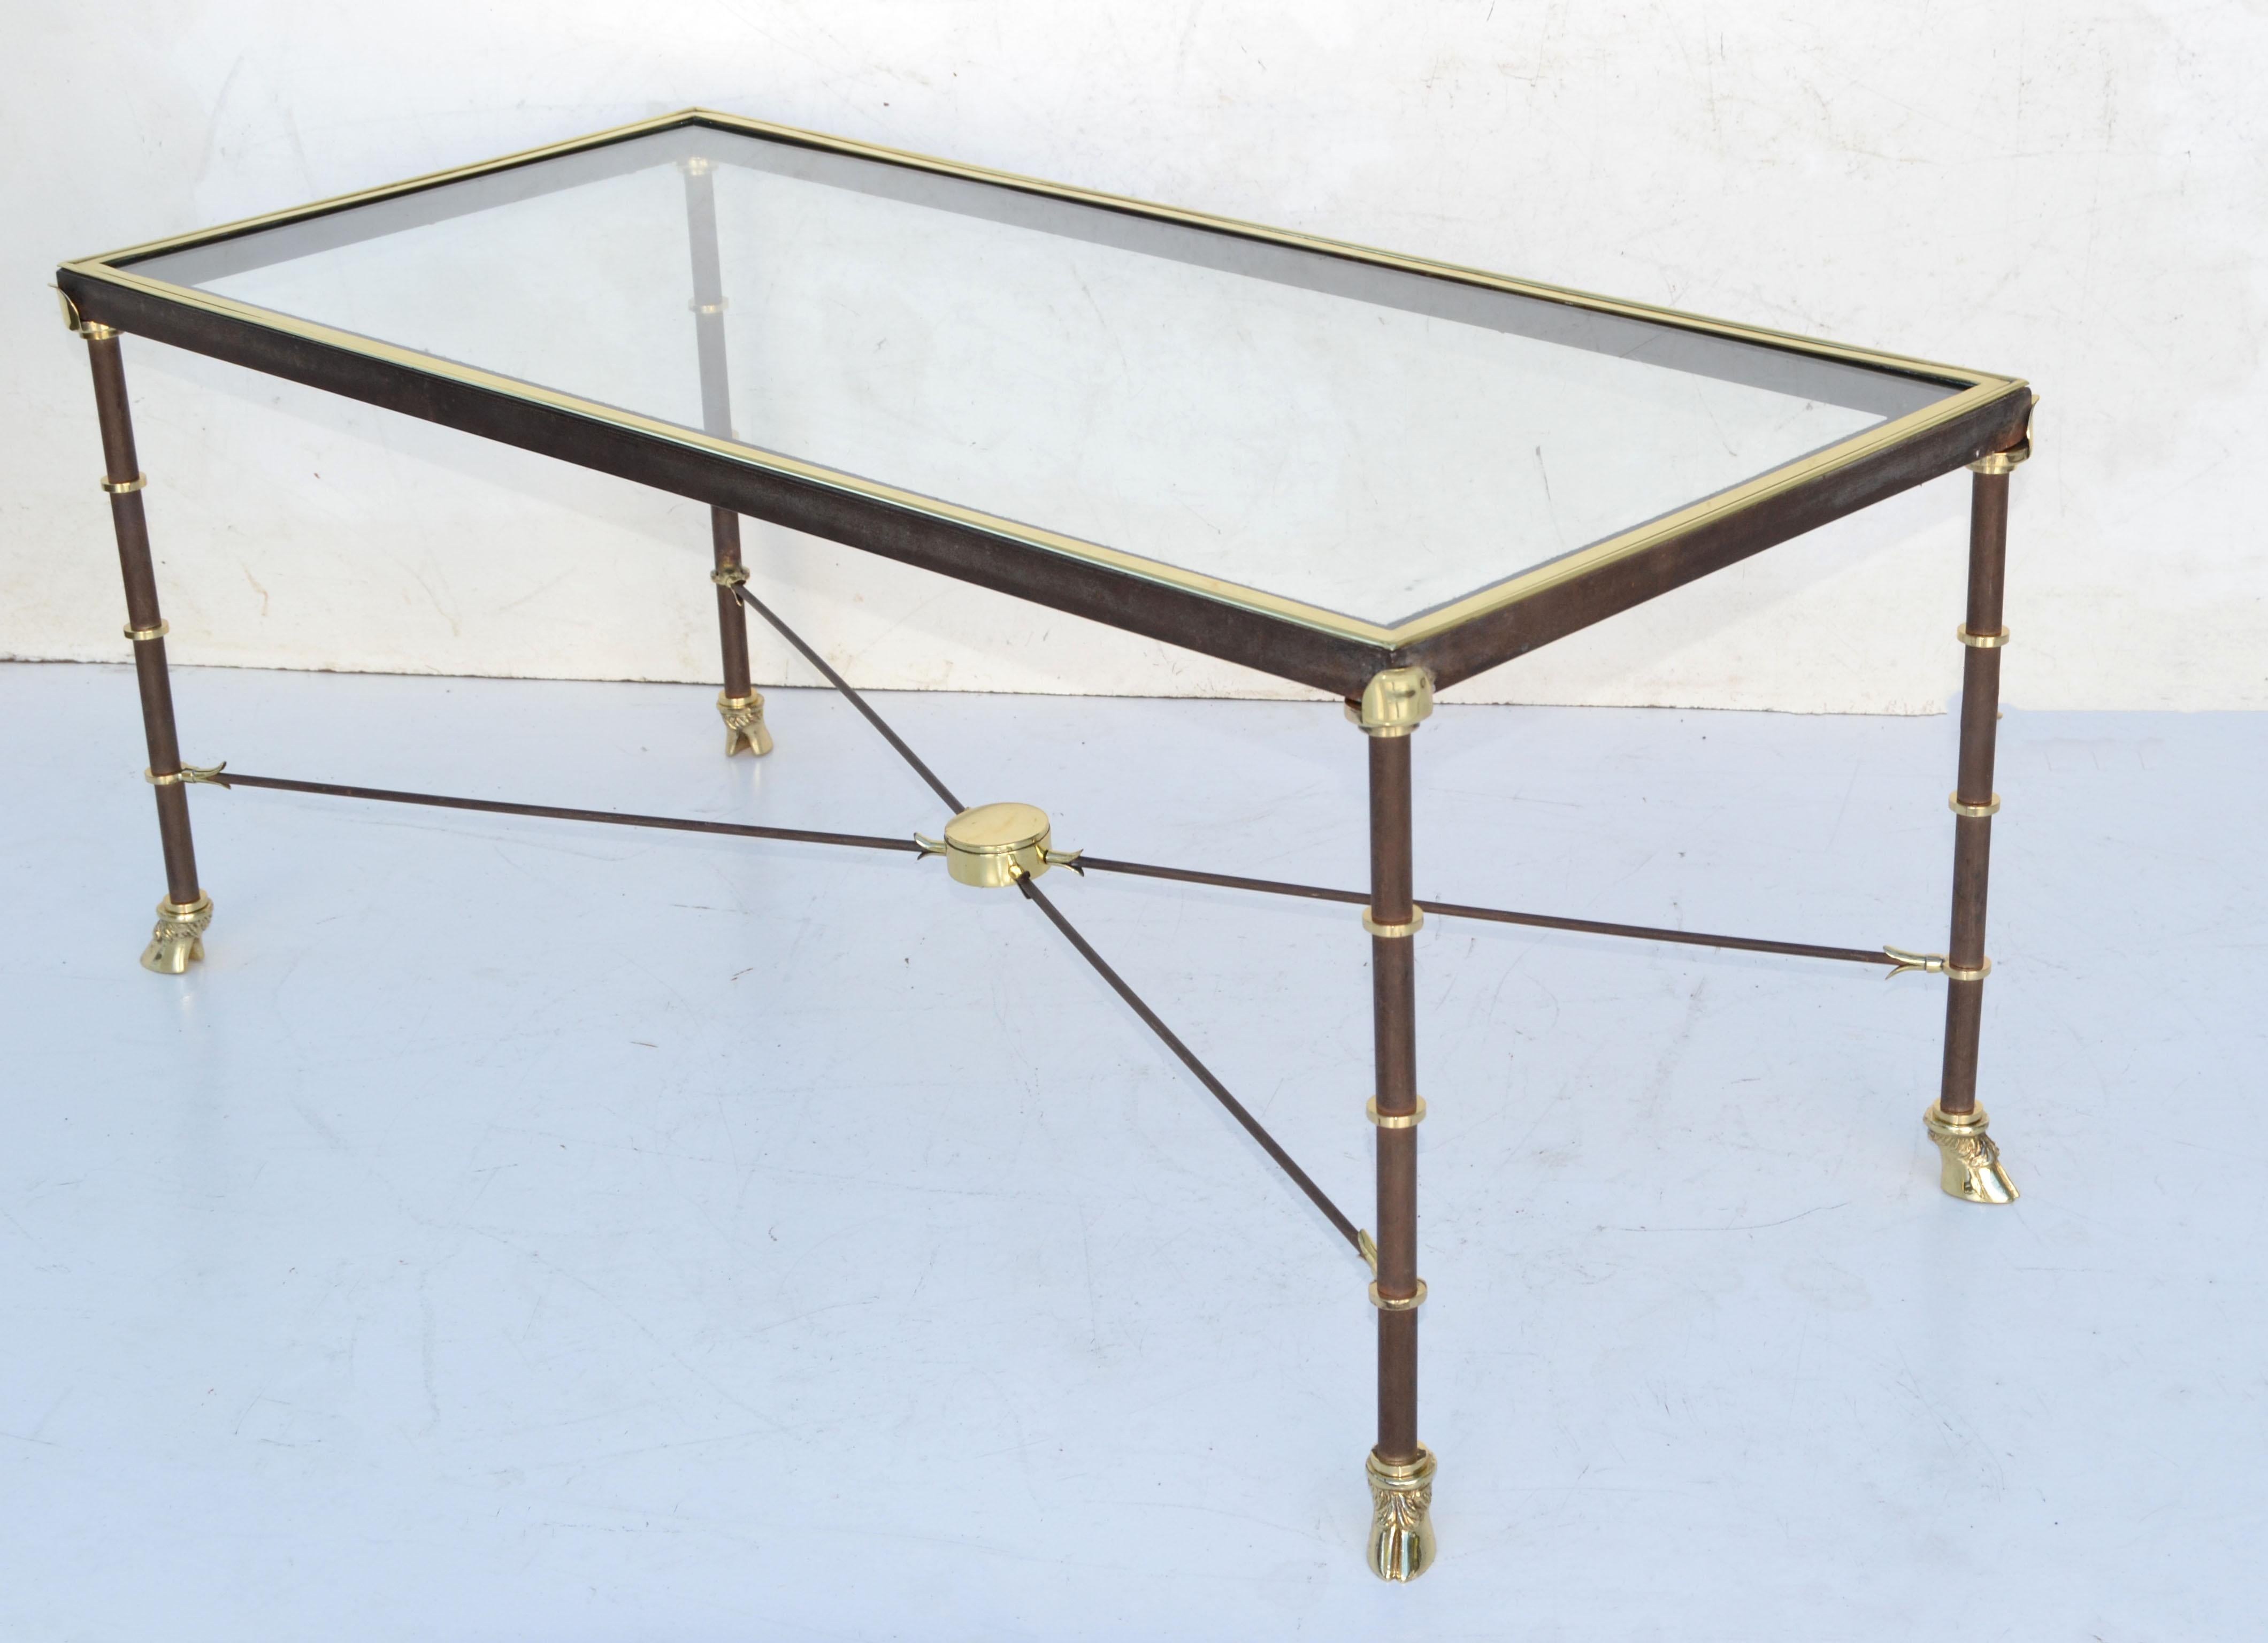 Maison Lancel French polished brass, steel & glass top coffee table with claw feet.
Mid-Century Modern Design made in France in 1960.
All restored condition and ready for a new Home.